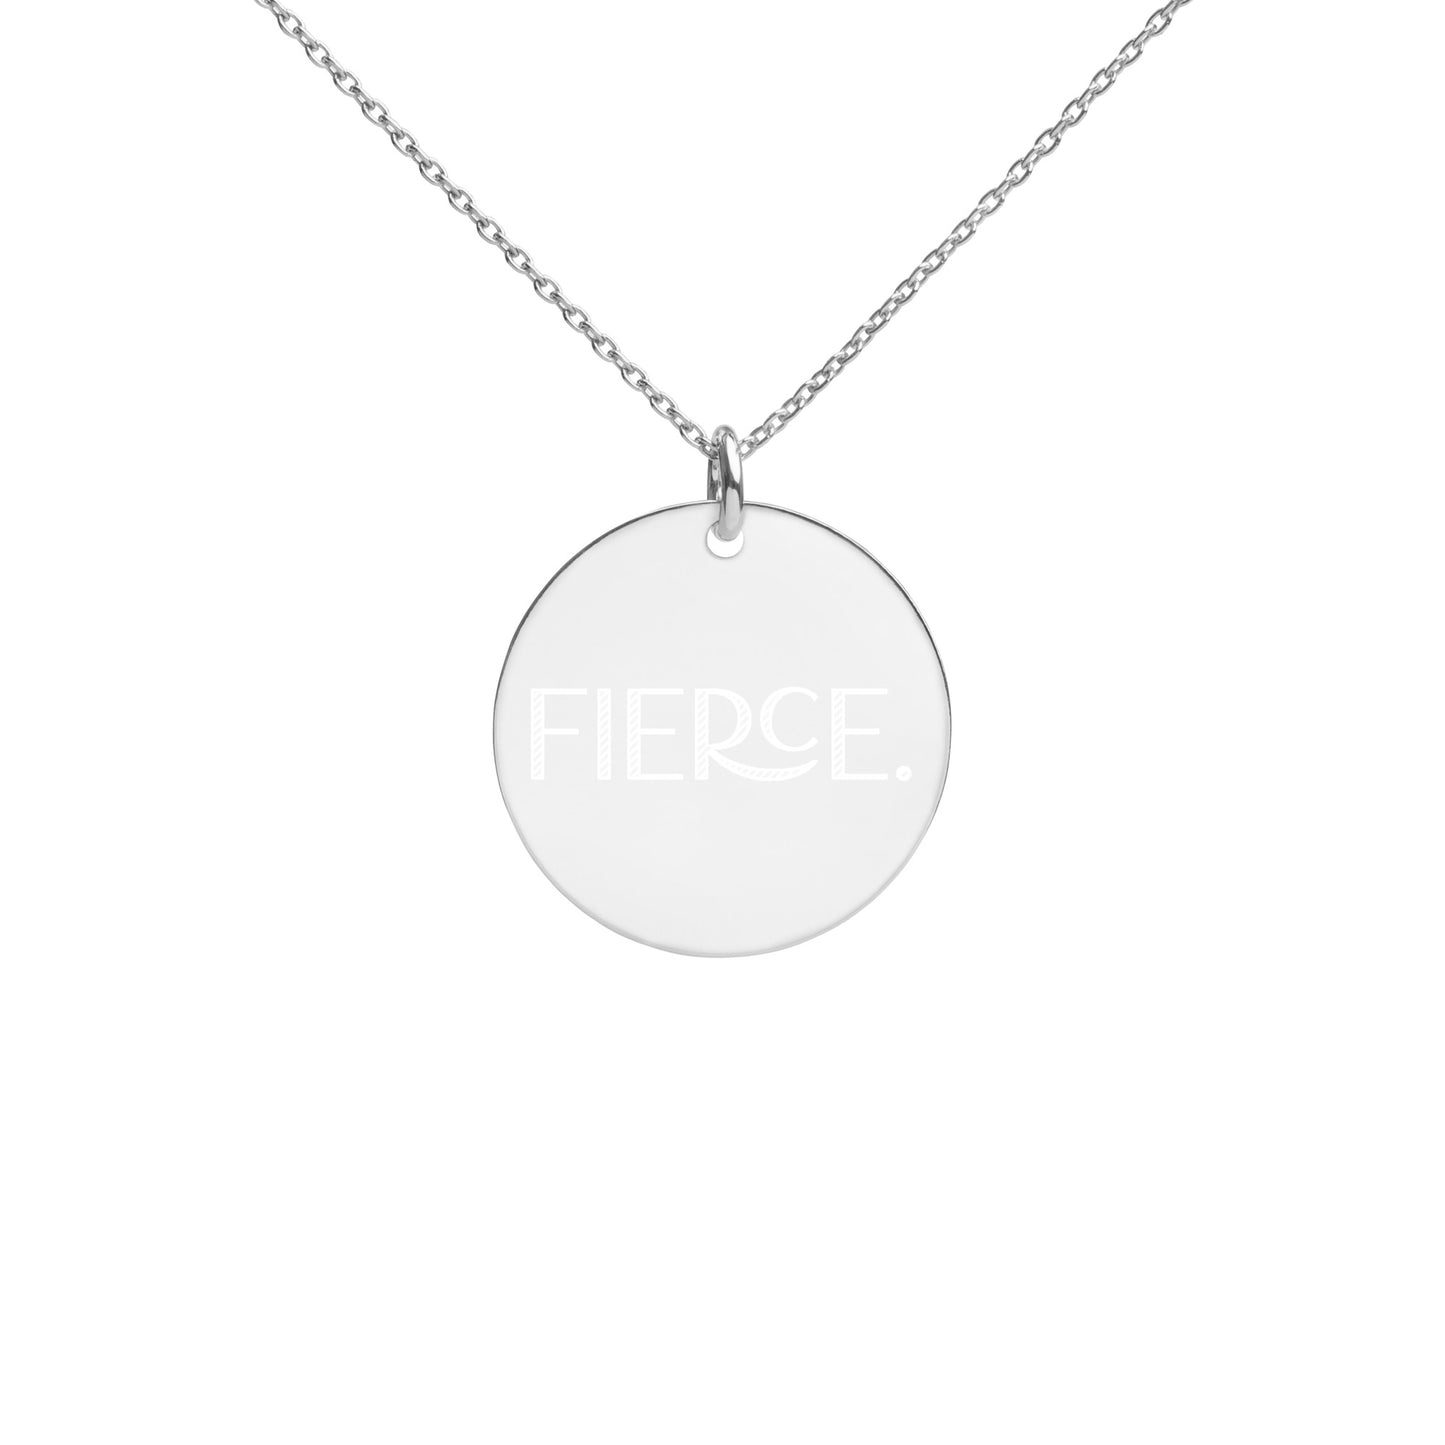 Fierce Engraved Circle Pendant Sterling Silver Necklace